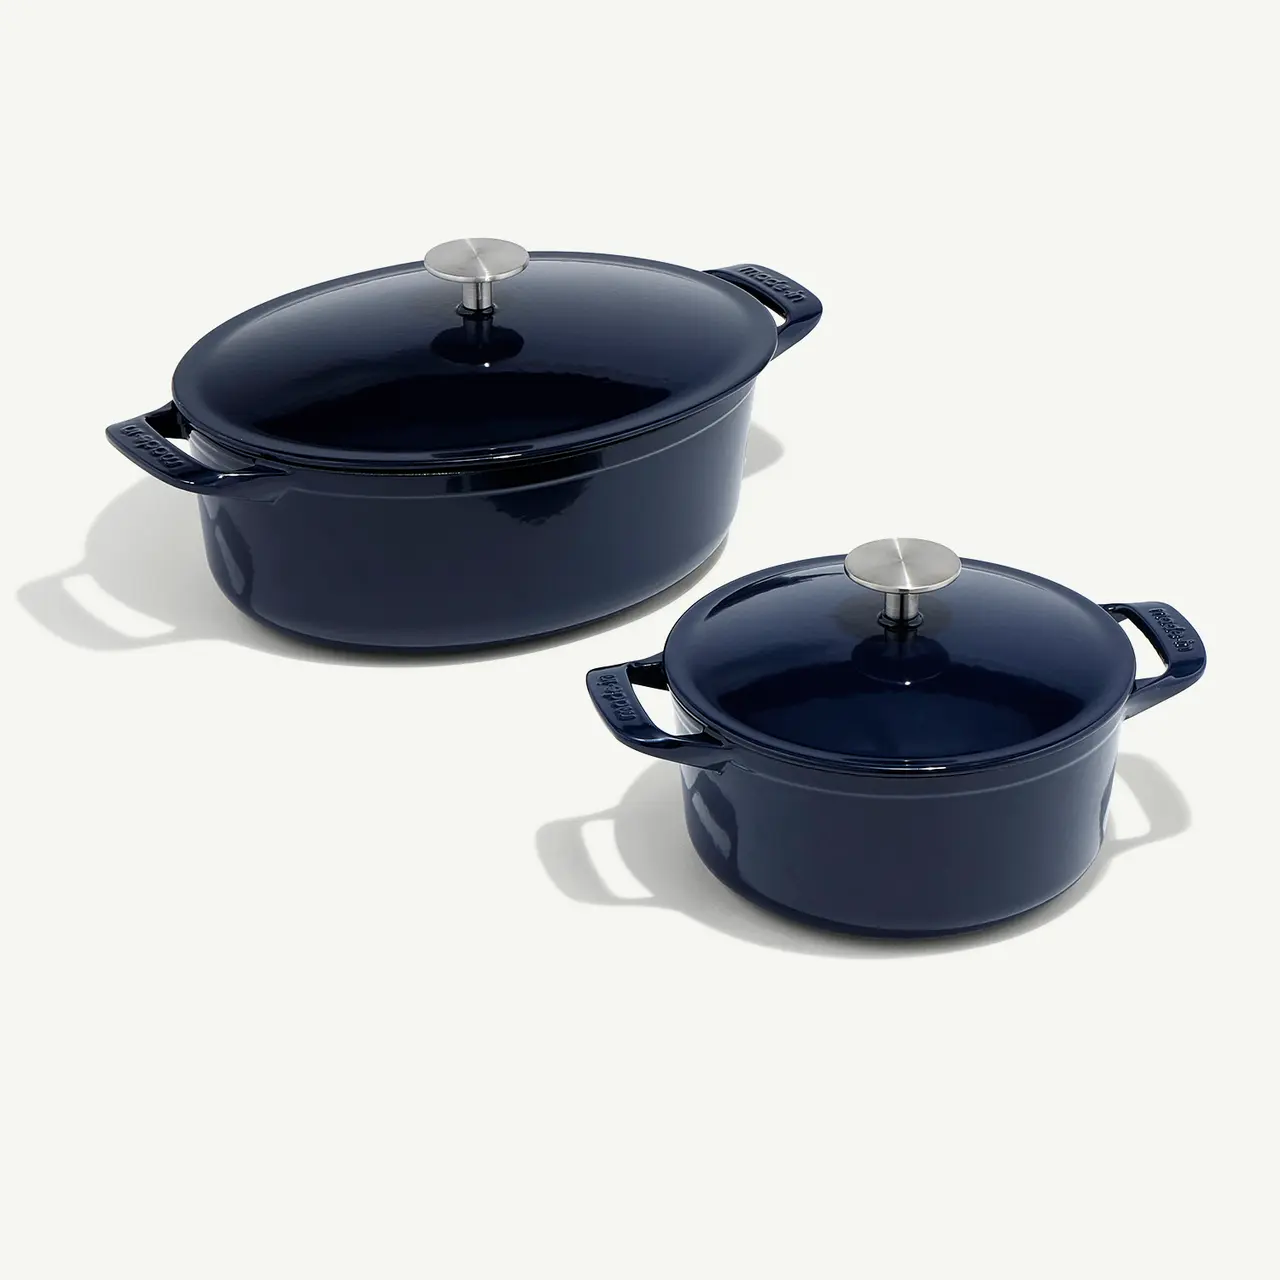 Two blue enameled cast iron pots with lids on a light background.